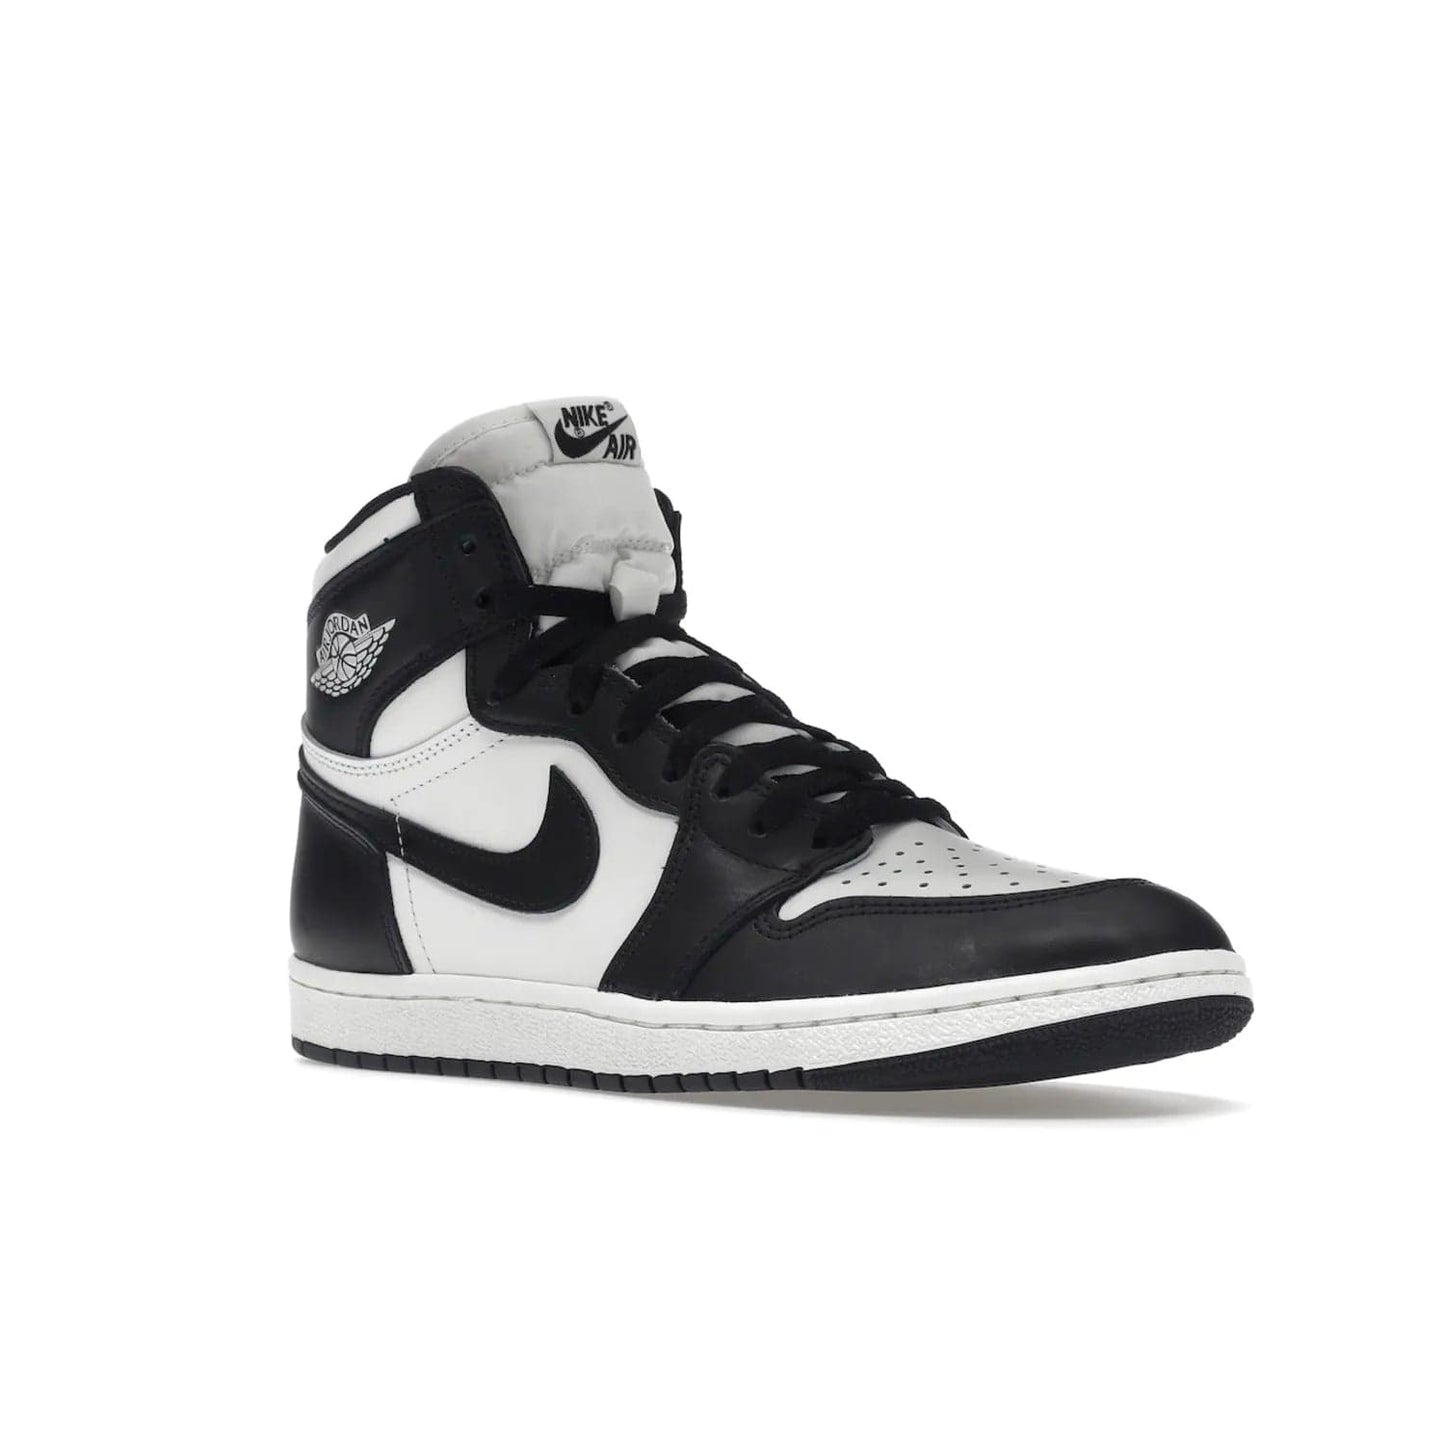 Jordan 1 Retro High 85 Black White (2023) - Image 5 - Only at www.BallersClubKickz.com - Brand new Jordan 1 Retro High 85 Black White (2023) now available. A classic color scheme of black and white leather uppers with signature Nike Air logo on the tongue. Must-have for any Air Jordan fan. Available February 15, 2023.